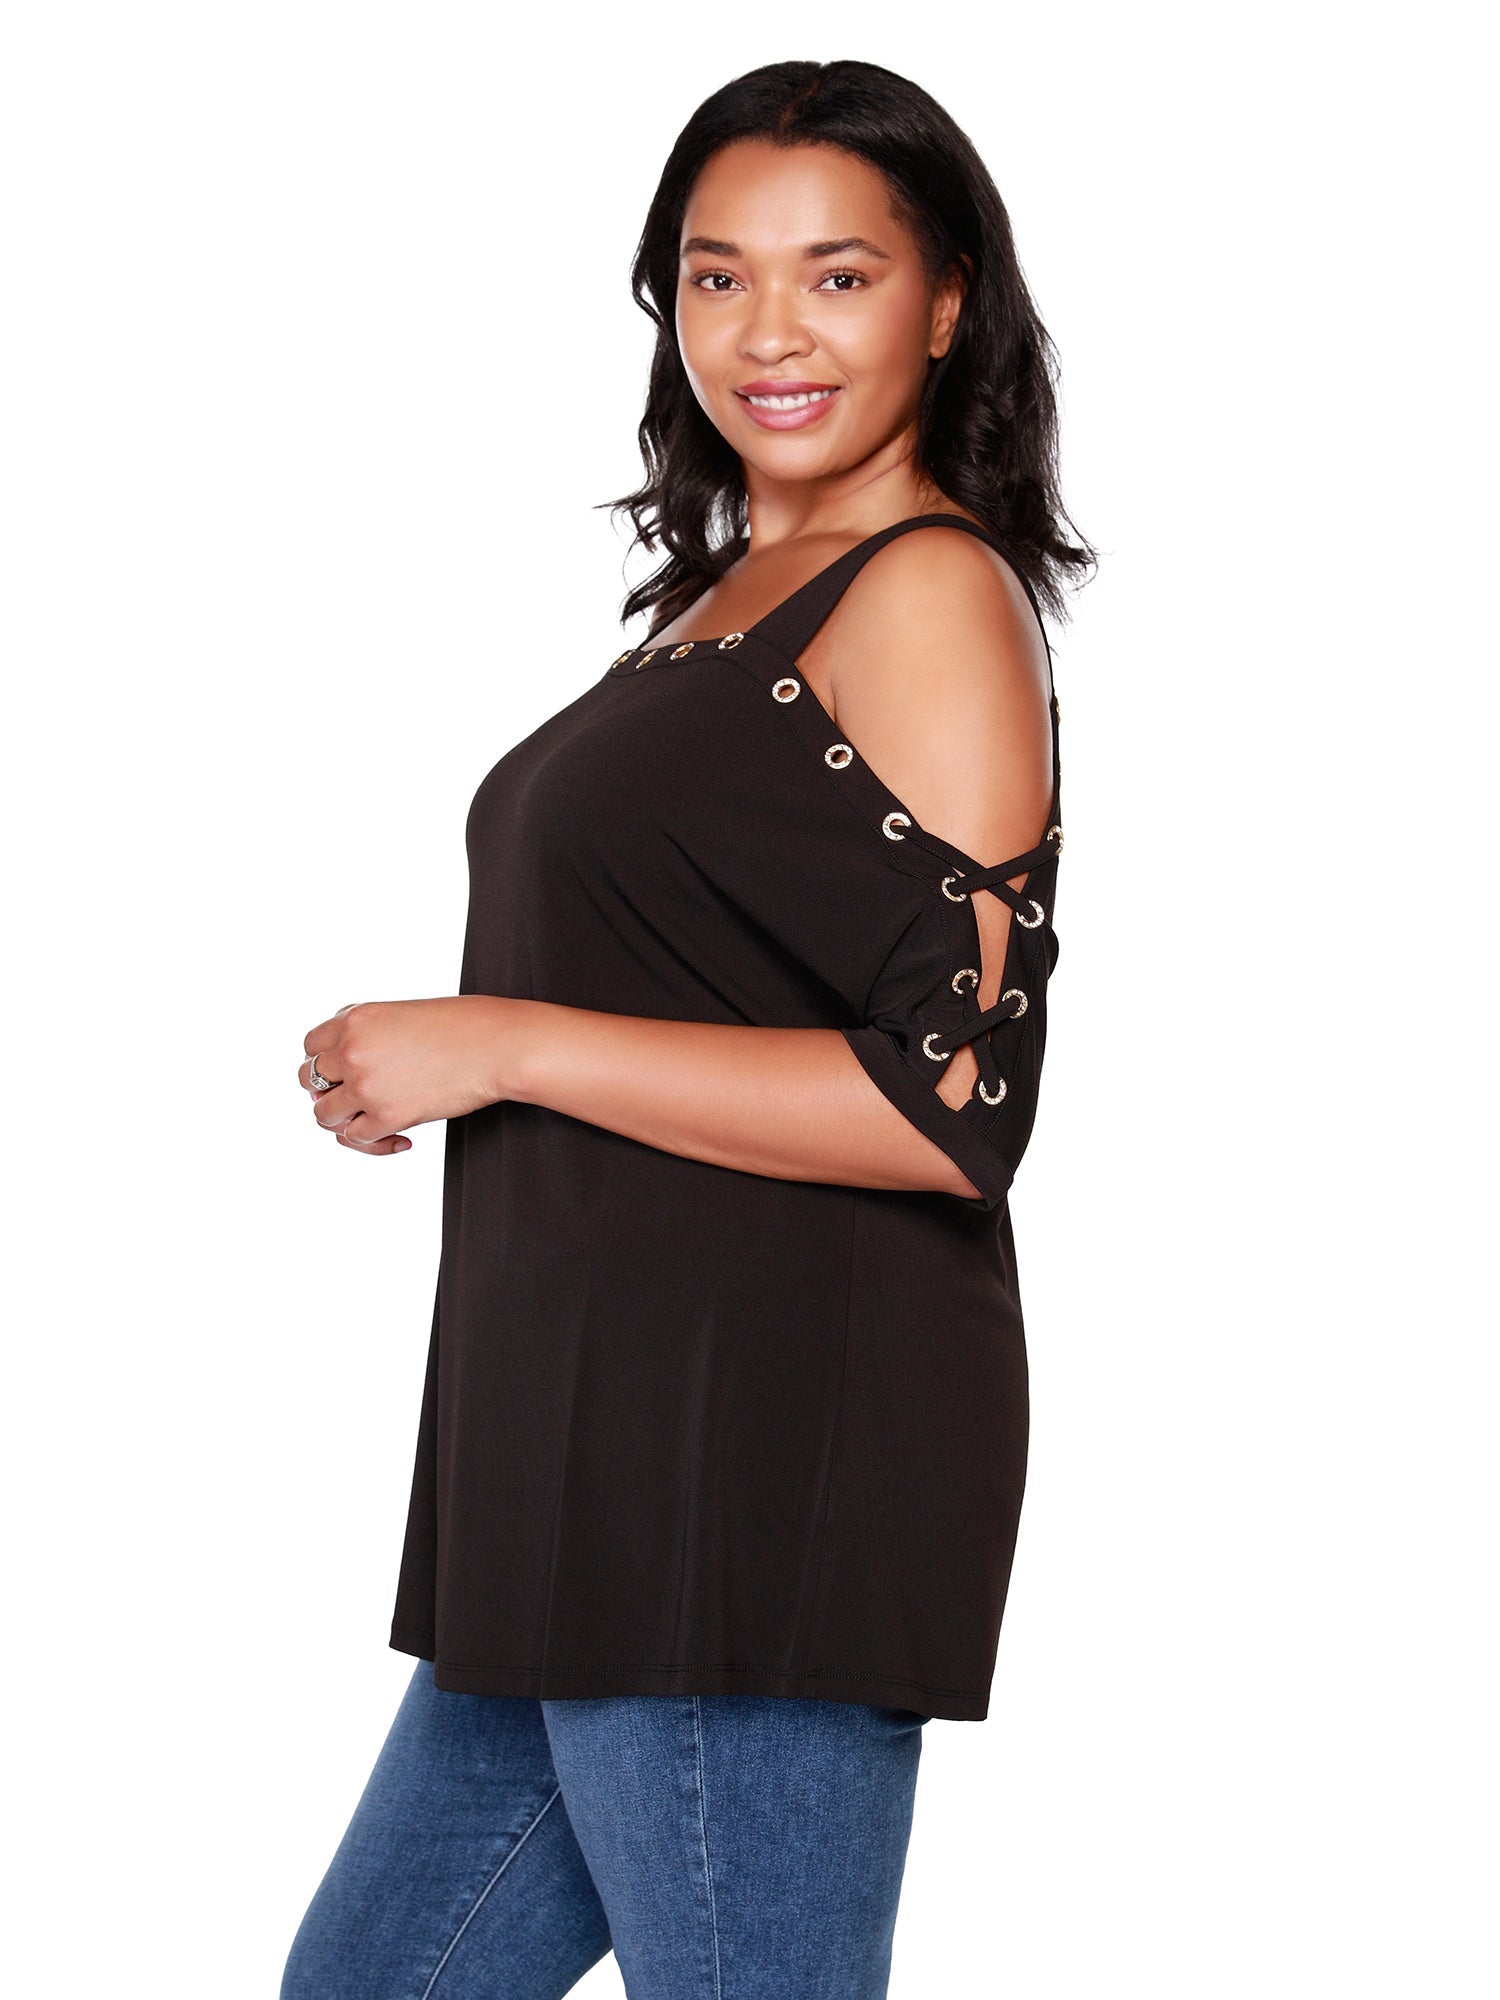 Womens Dressy Cold Shoulder Tunic Top with Laced Short Sleeves and Rhinestone Grommet Details | Curvy